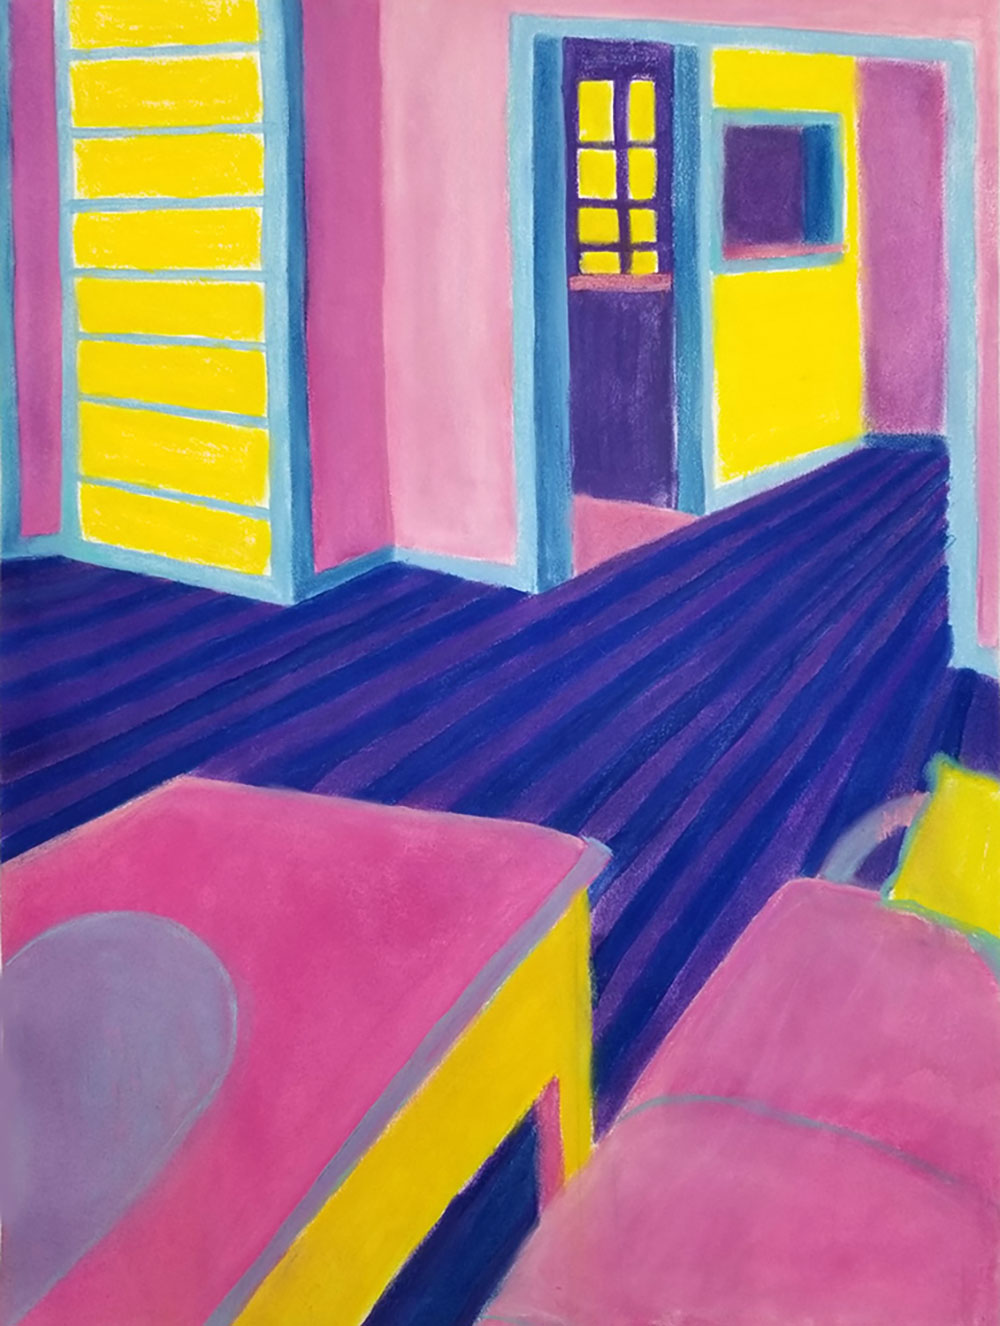 A colorful drawing of a room with a door and desk. using yellow blues purples and pinks